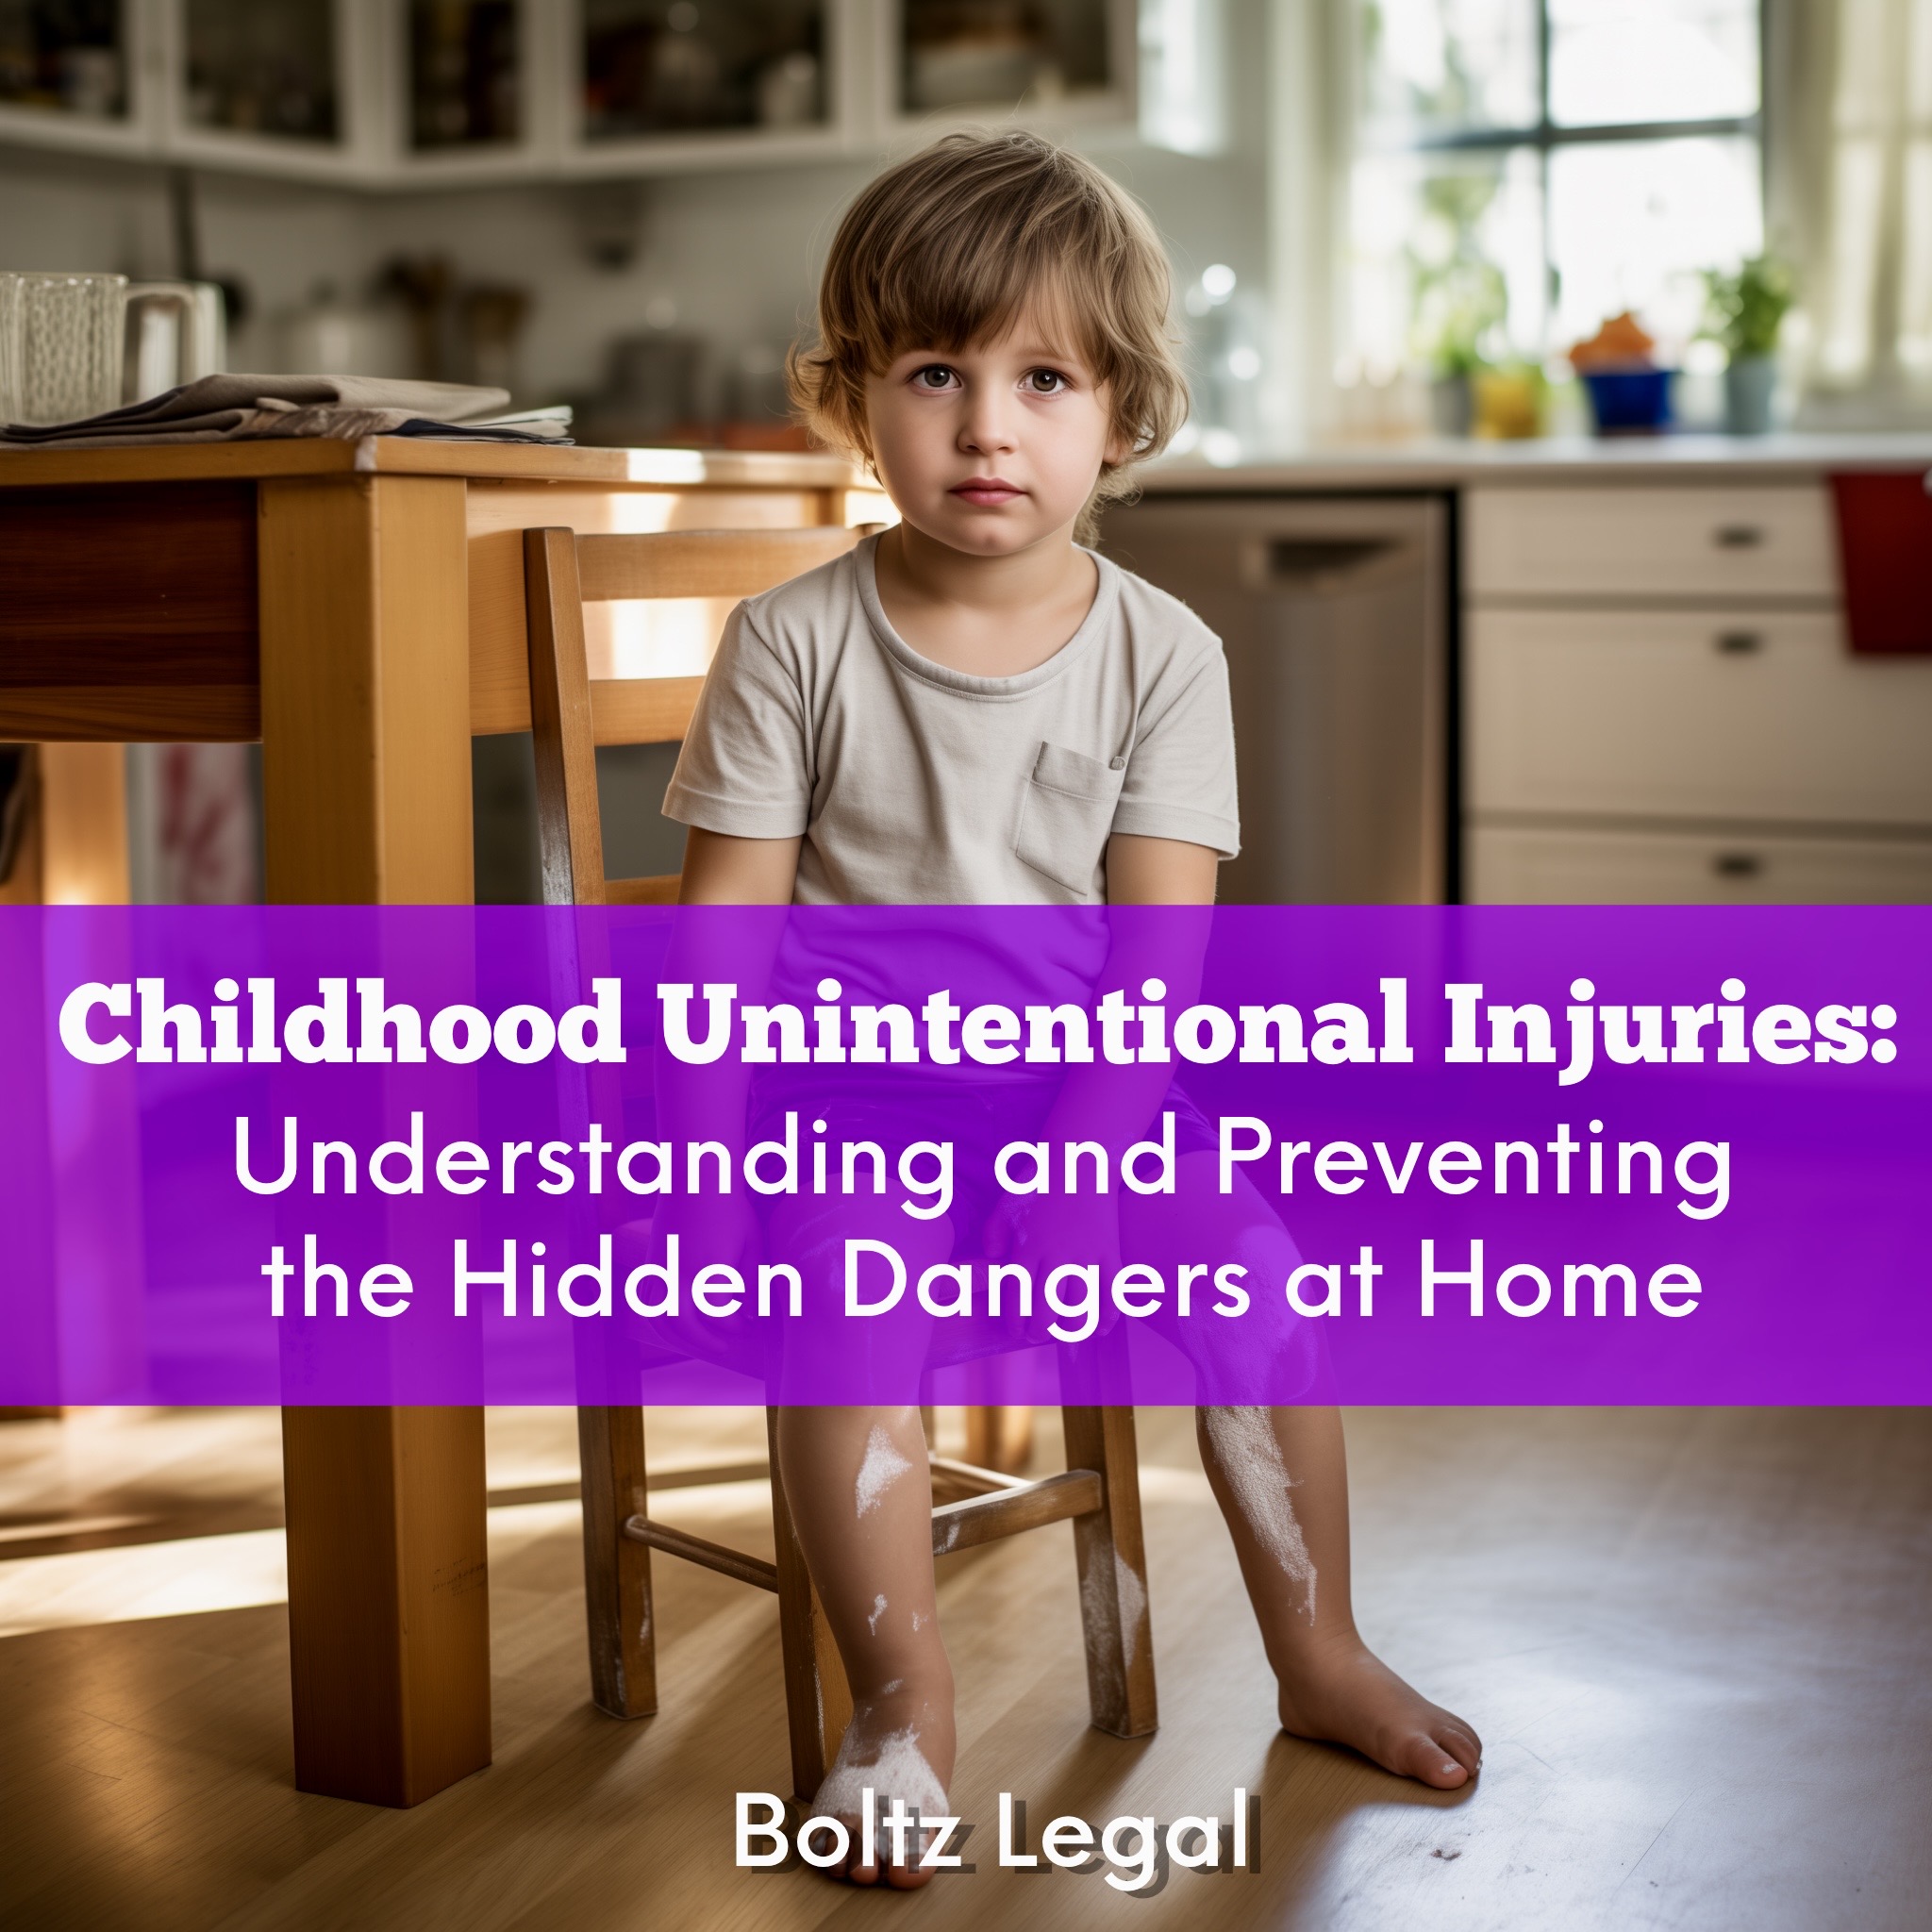 Childhood Unintentional Injuries Understanding and Preventing the Hidden Dangers at Home